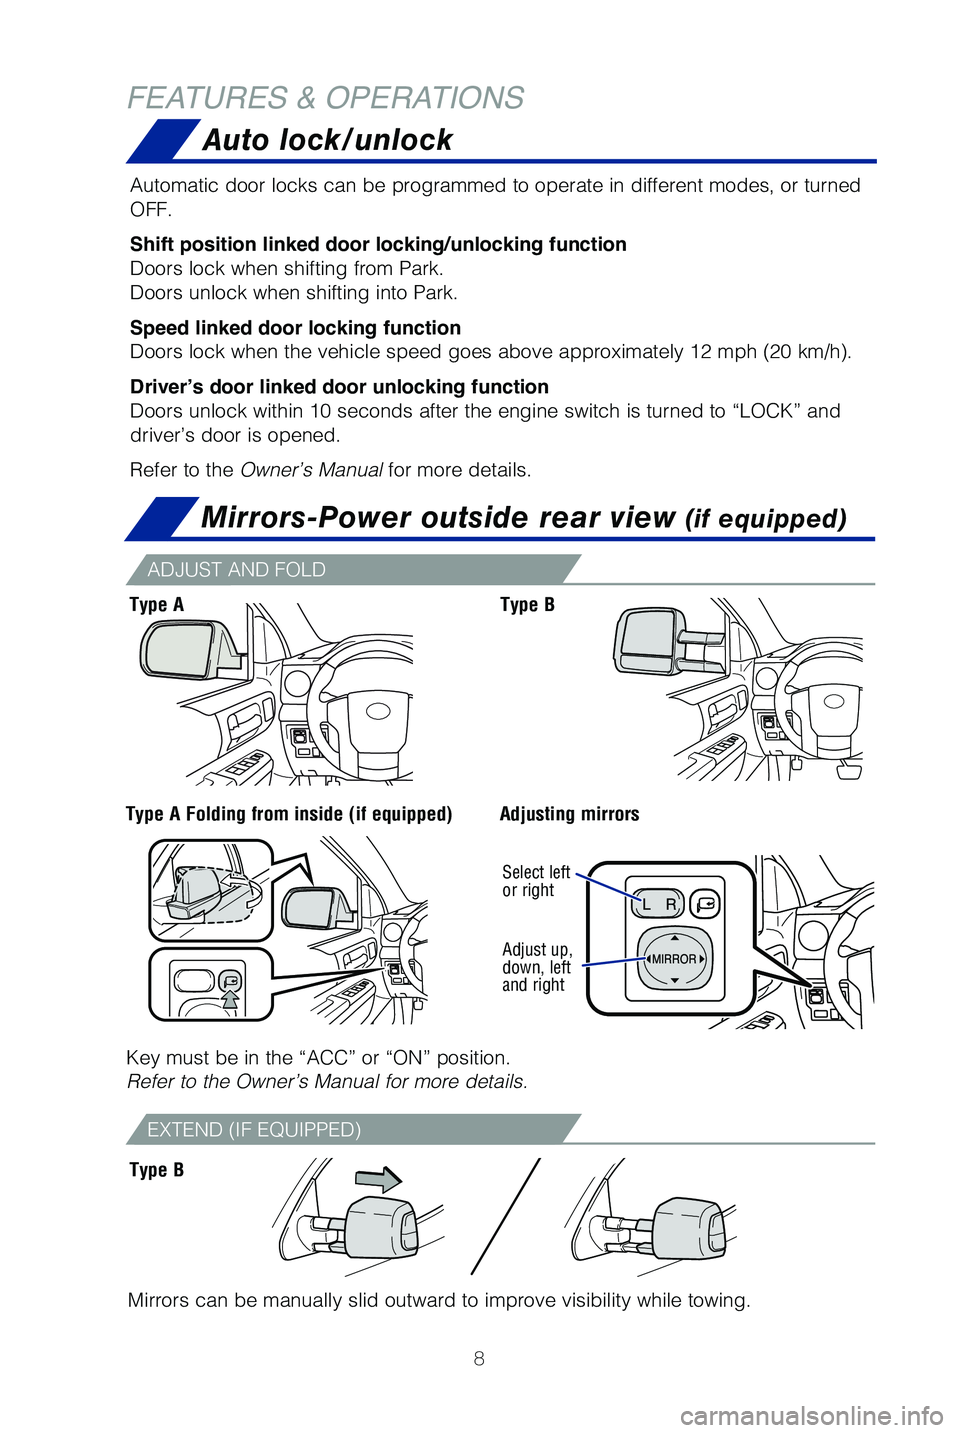 TOYOTA TUNDRA 2019  Owners Manual (in English) 8
FEATURES & OPERATIONSMirrors-Power outside rear view 
(if equipped)
Mirrors can be manually slid outward to improve visibility while towing.\
Adjust up, 
down, left 
and right Select left 
or right